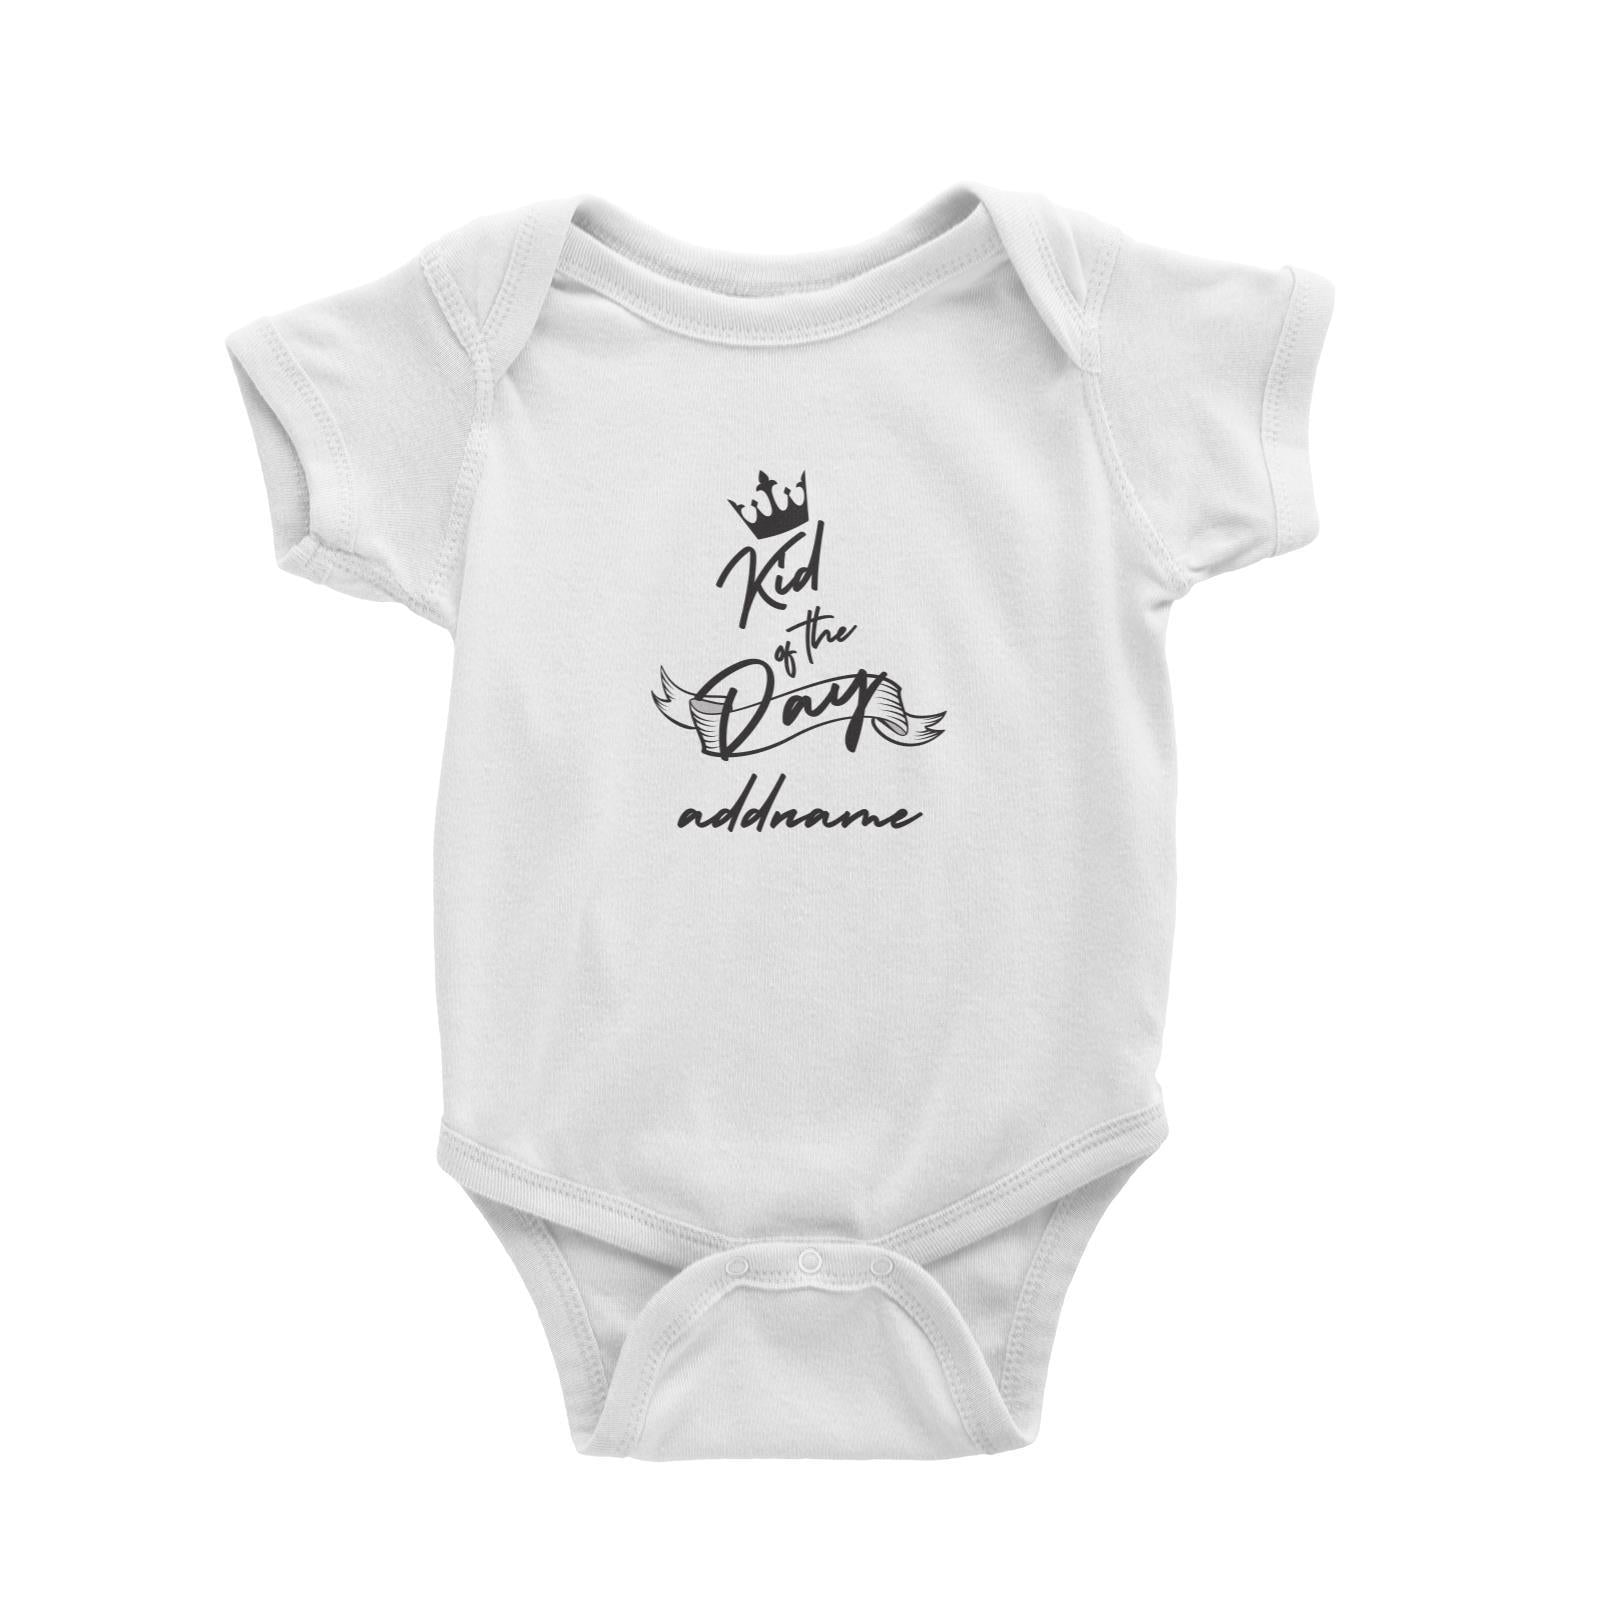 Birthday Typography Kid Of The Day Addname Baby Romper